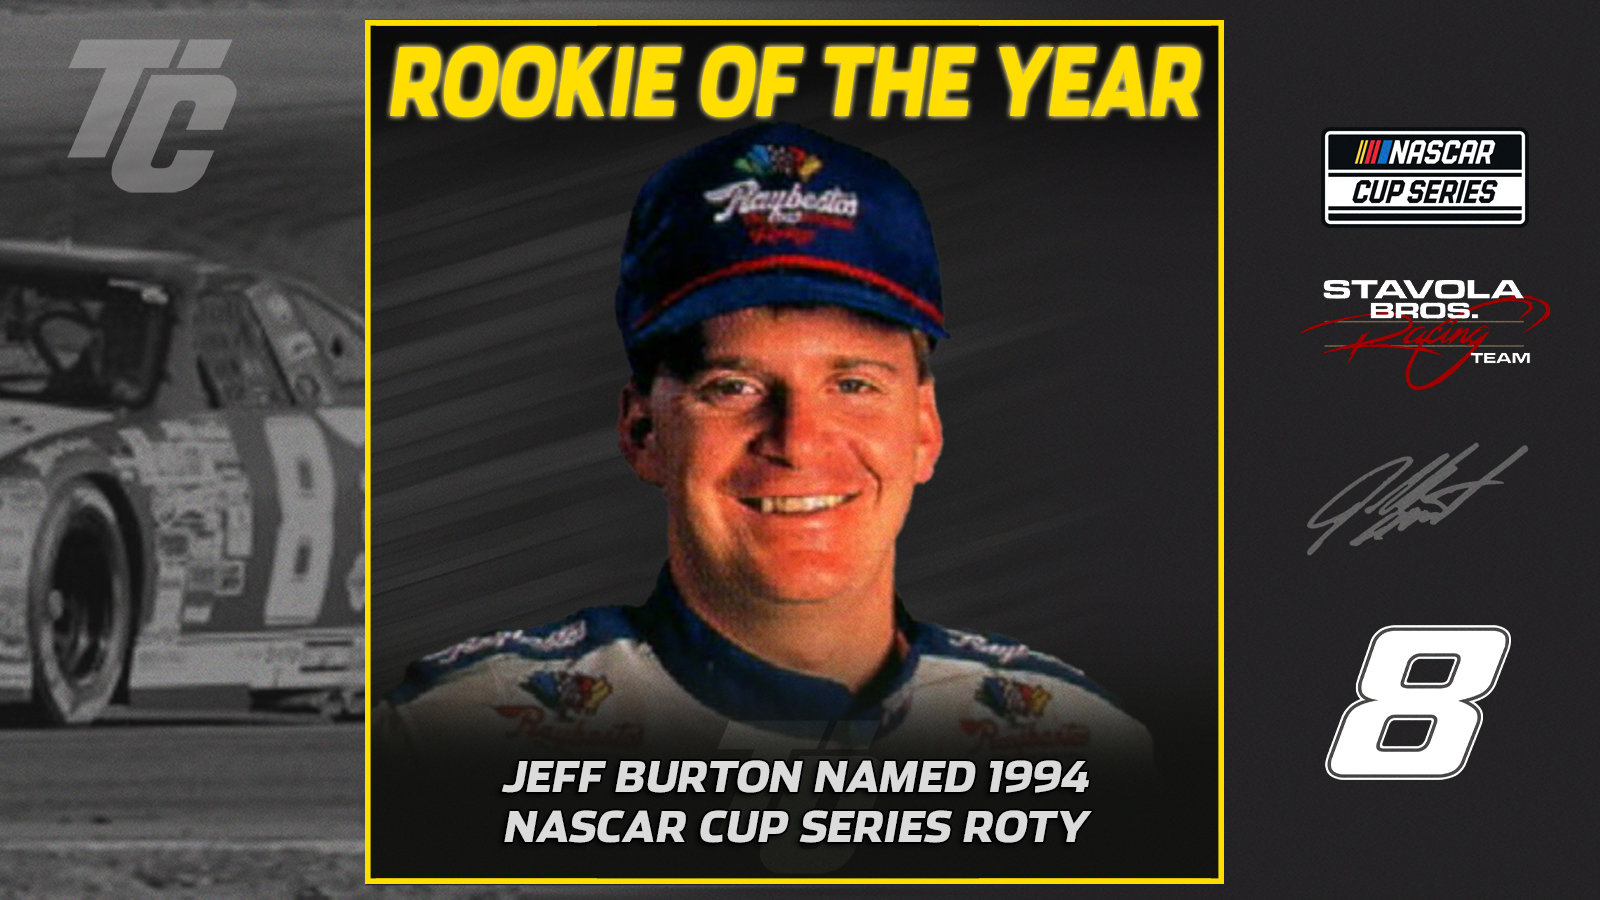 1994 NASCAR Winston Cup Series Rookie of the Year Standings Jeff Burton 1994 NASCAR Cup Rookie of the Year